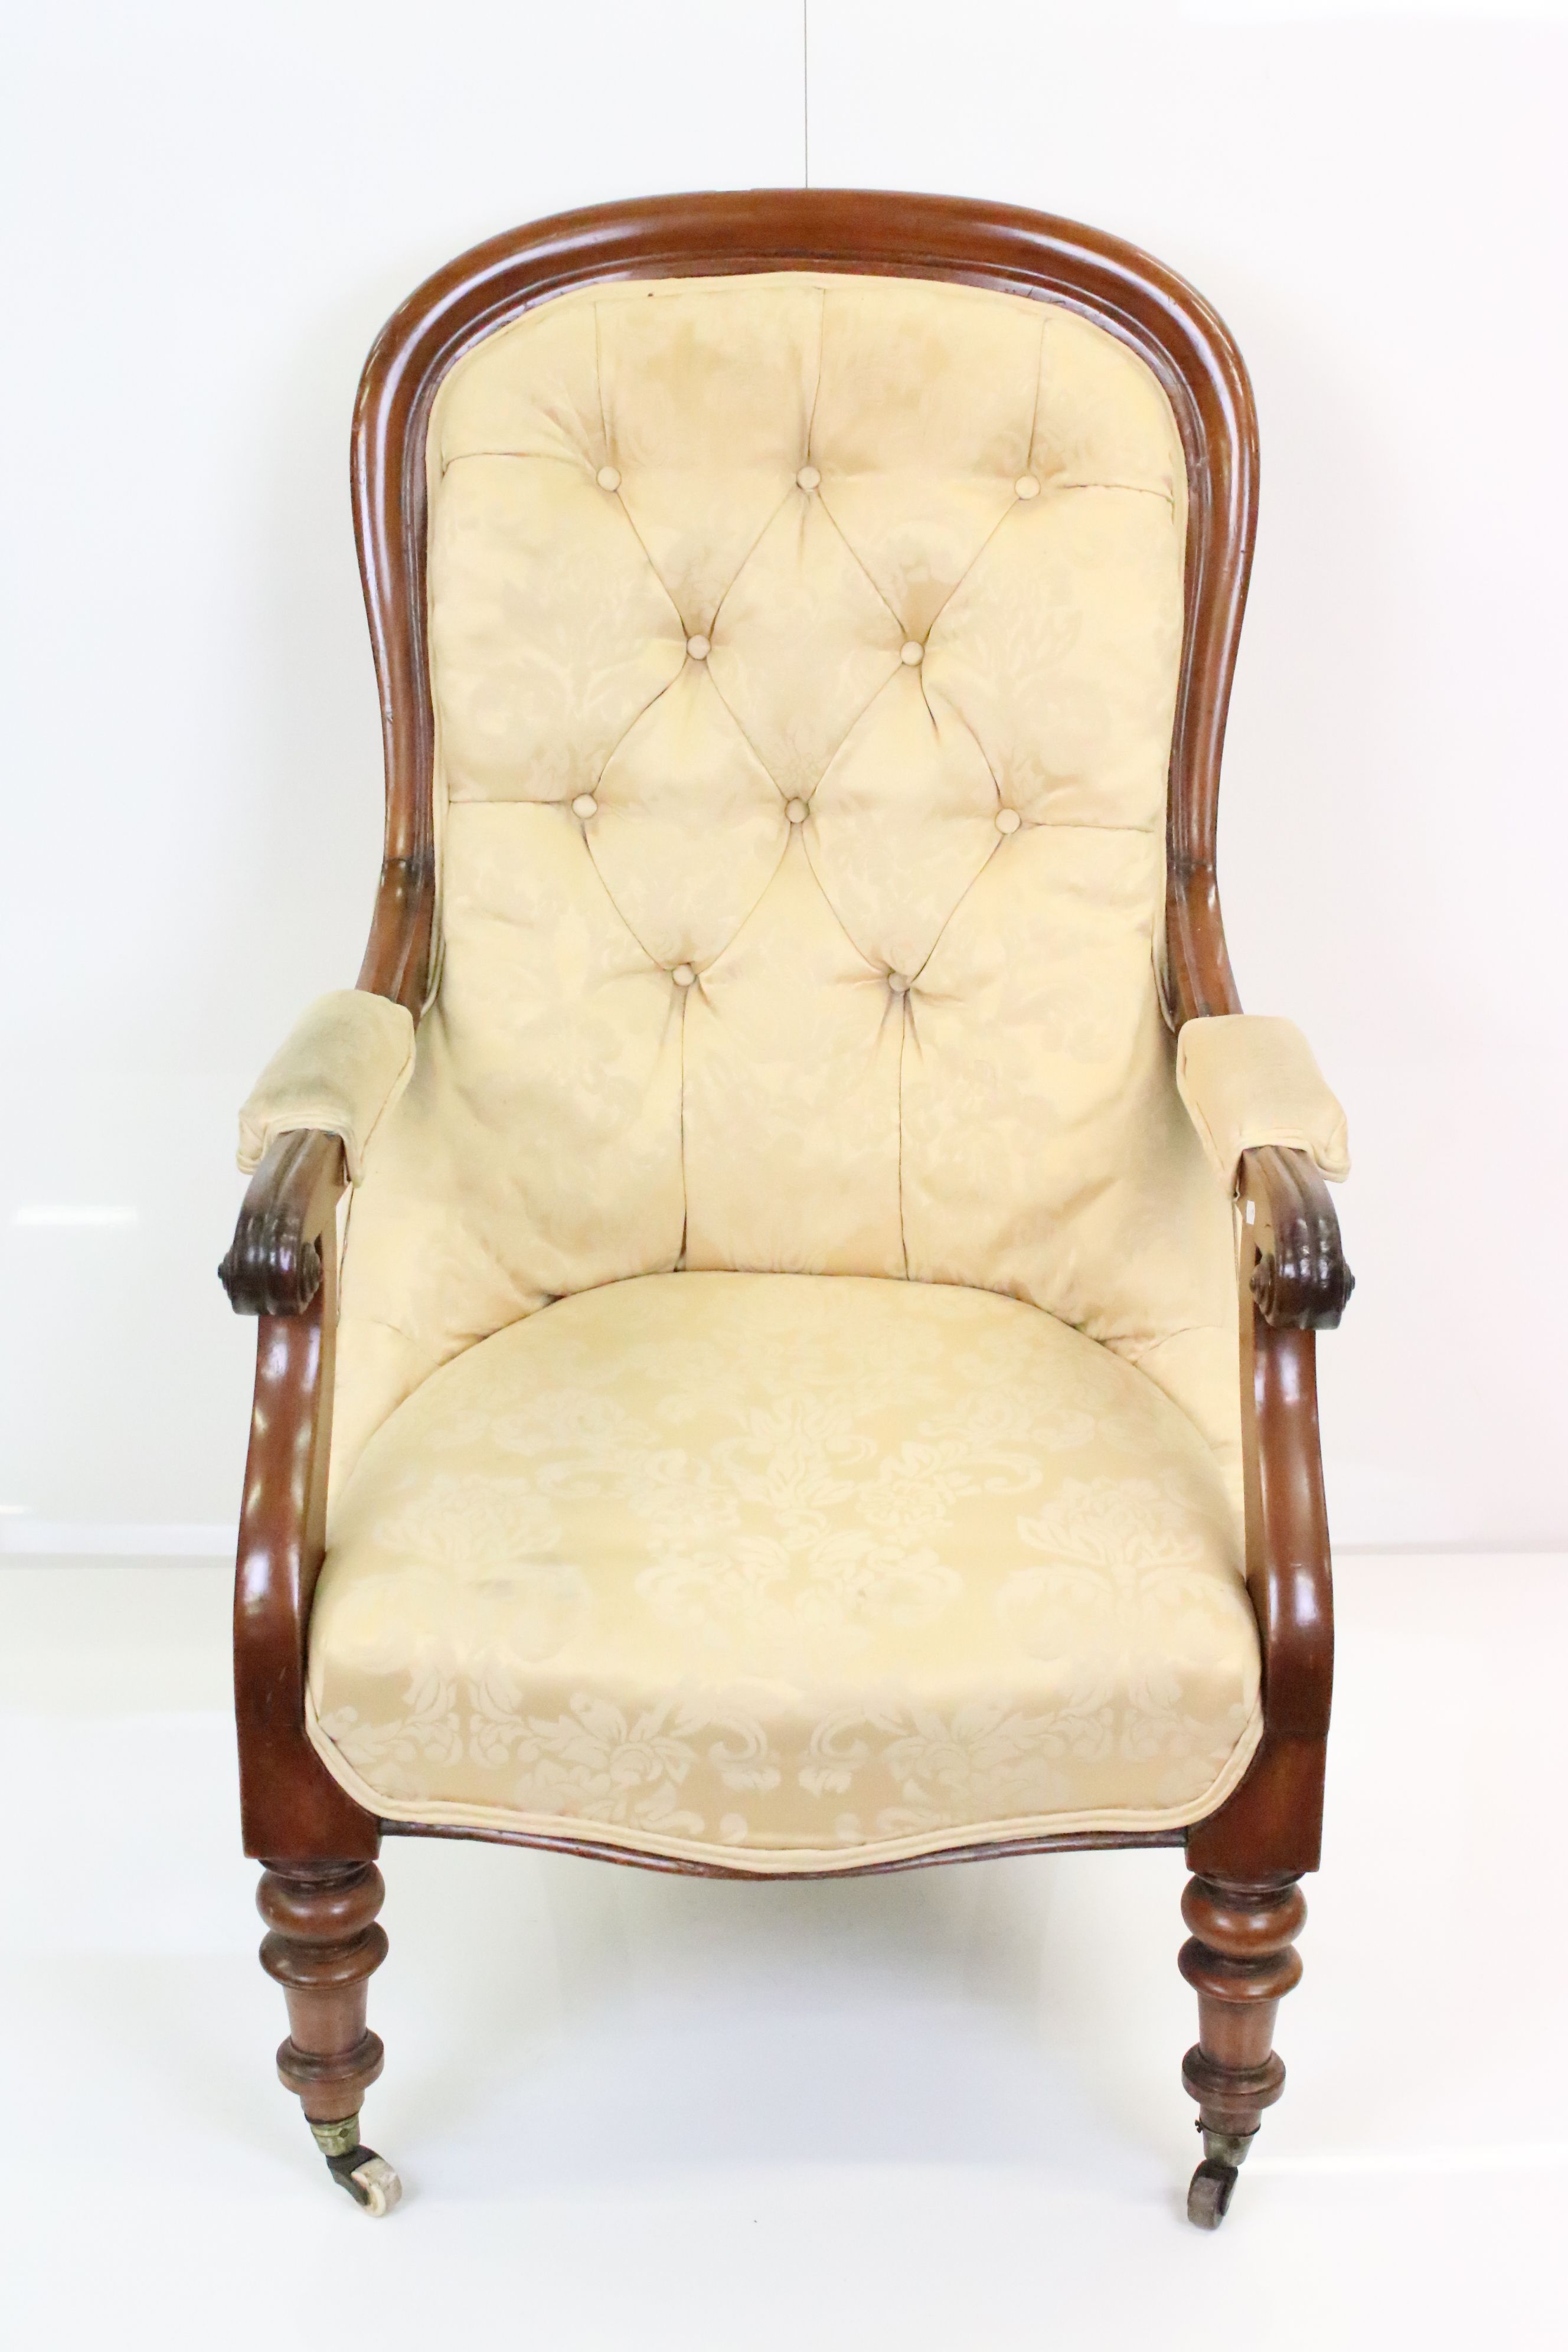 19th century Cream Upholstered Armchair, the mahogany show frame with scrolling carved arms, - Image 3 of 7